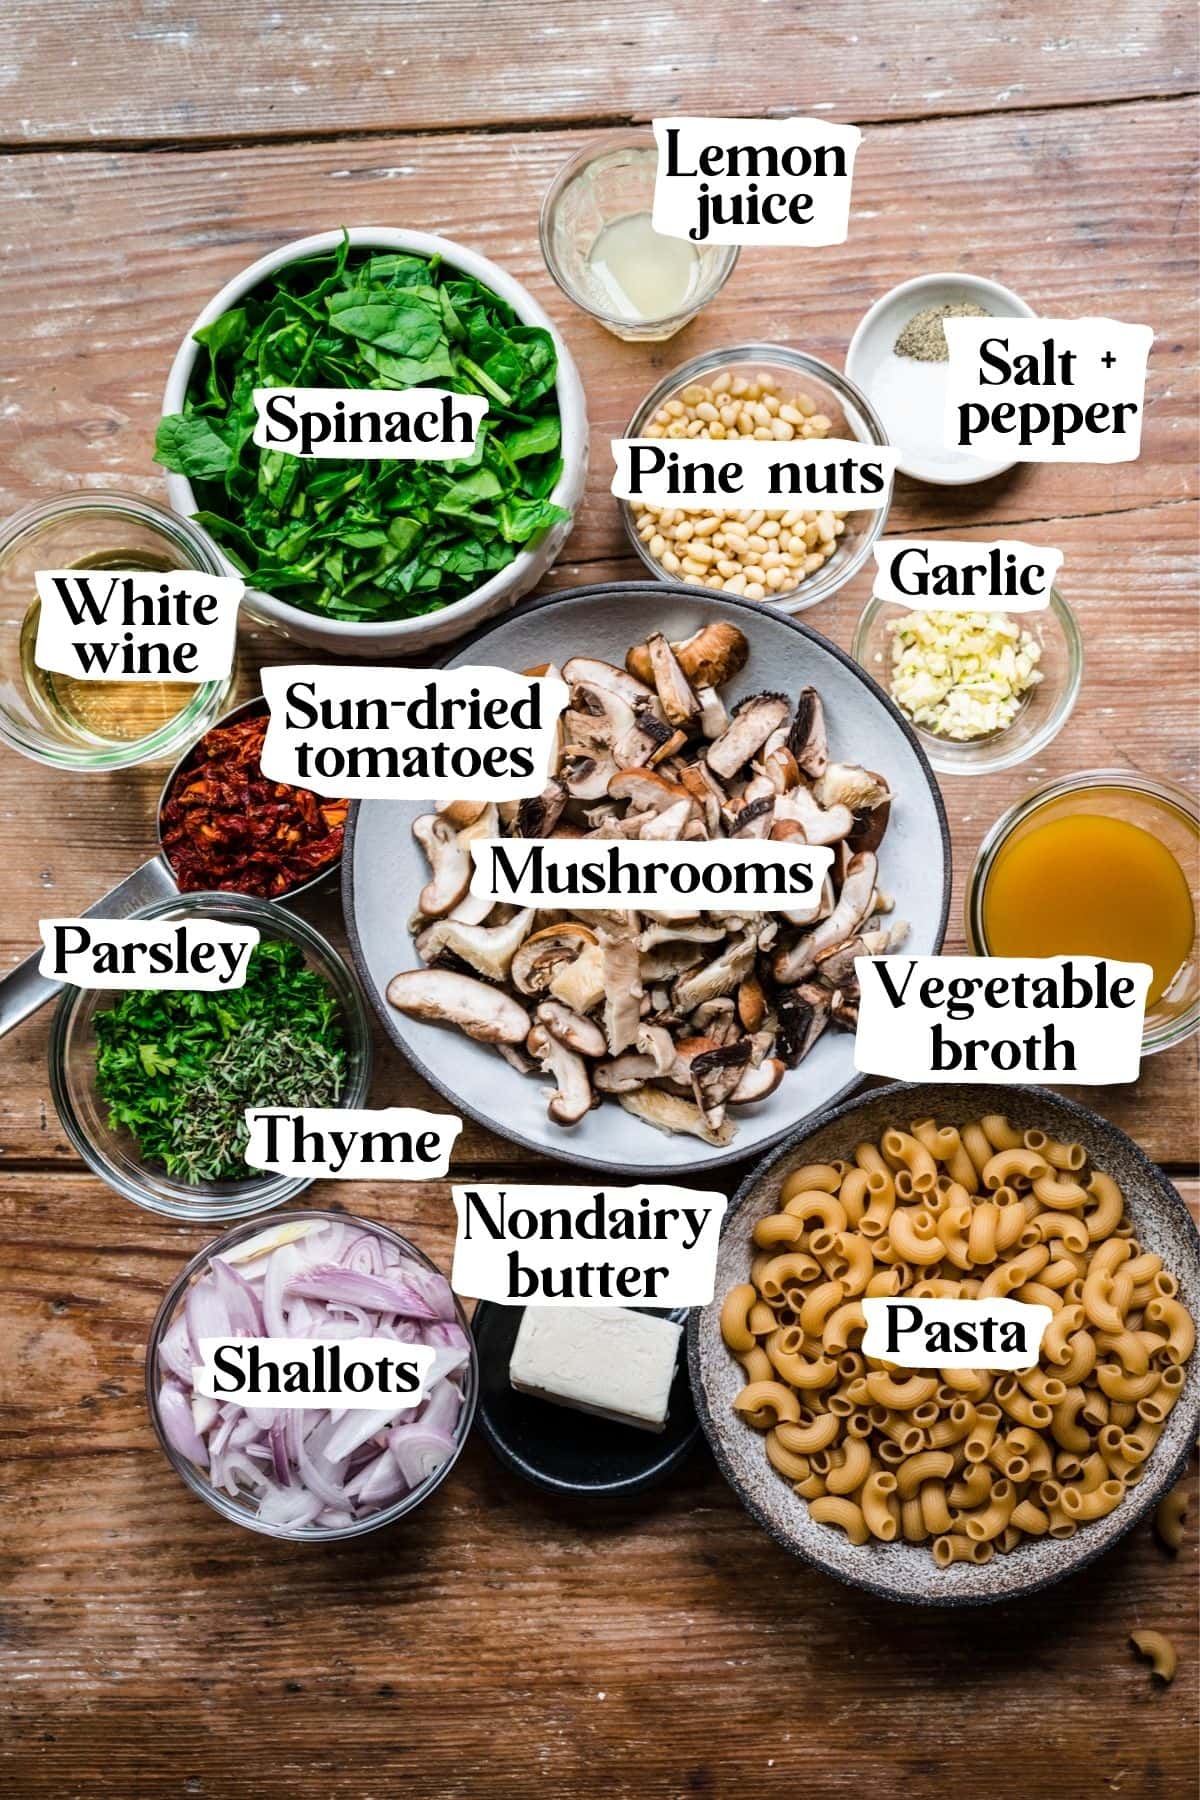 Overhead view of mushroom pasta ingredients, including spinach, mushrooms, and pasta.